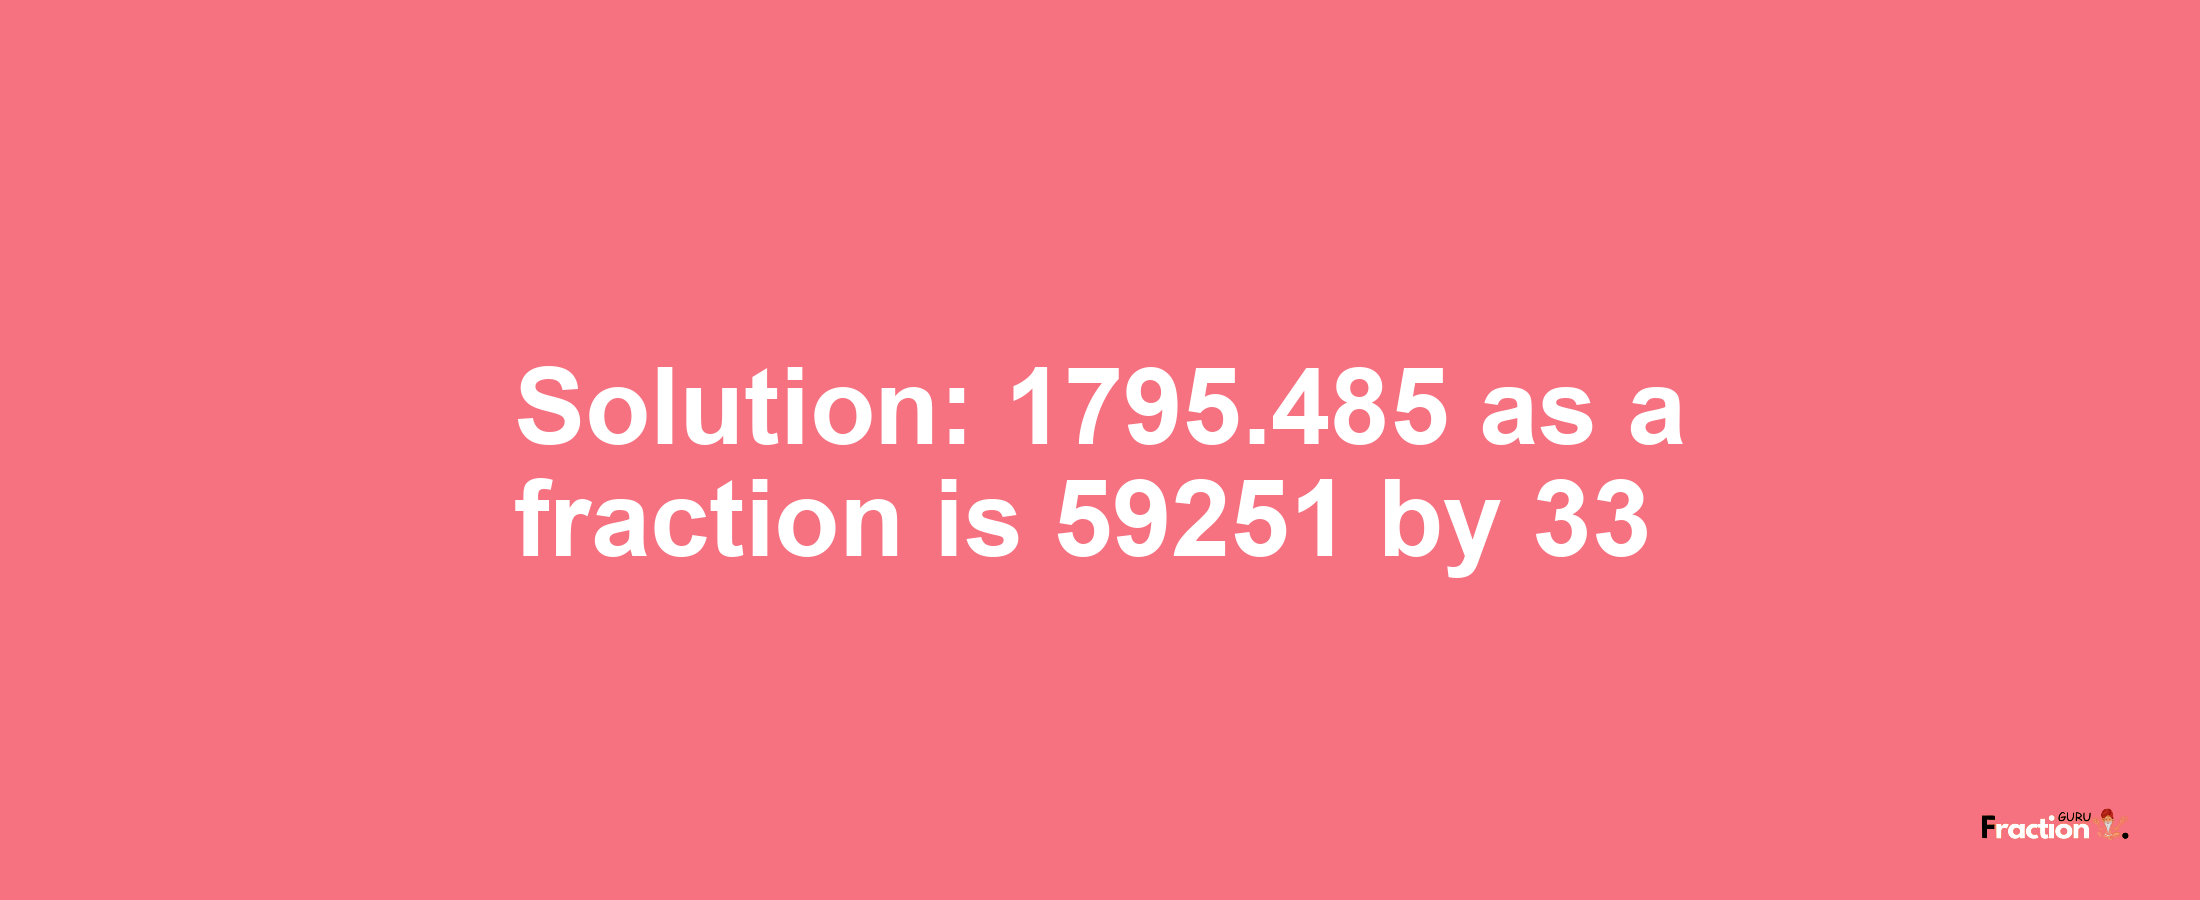 Solution:1795.485 as a fraction is 59251/33